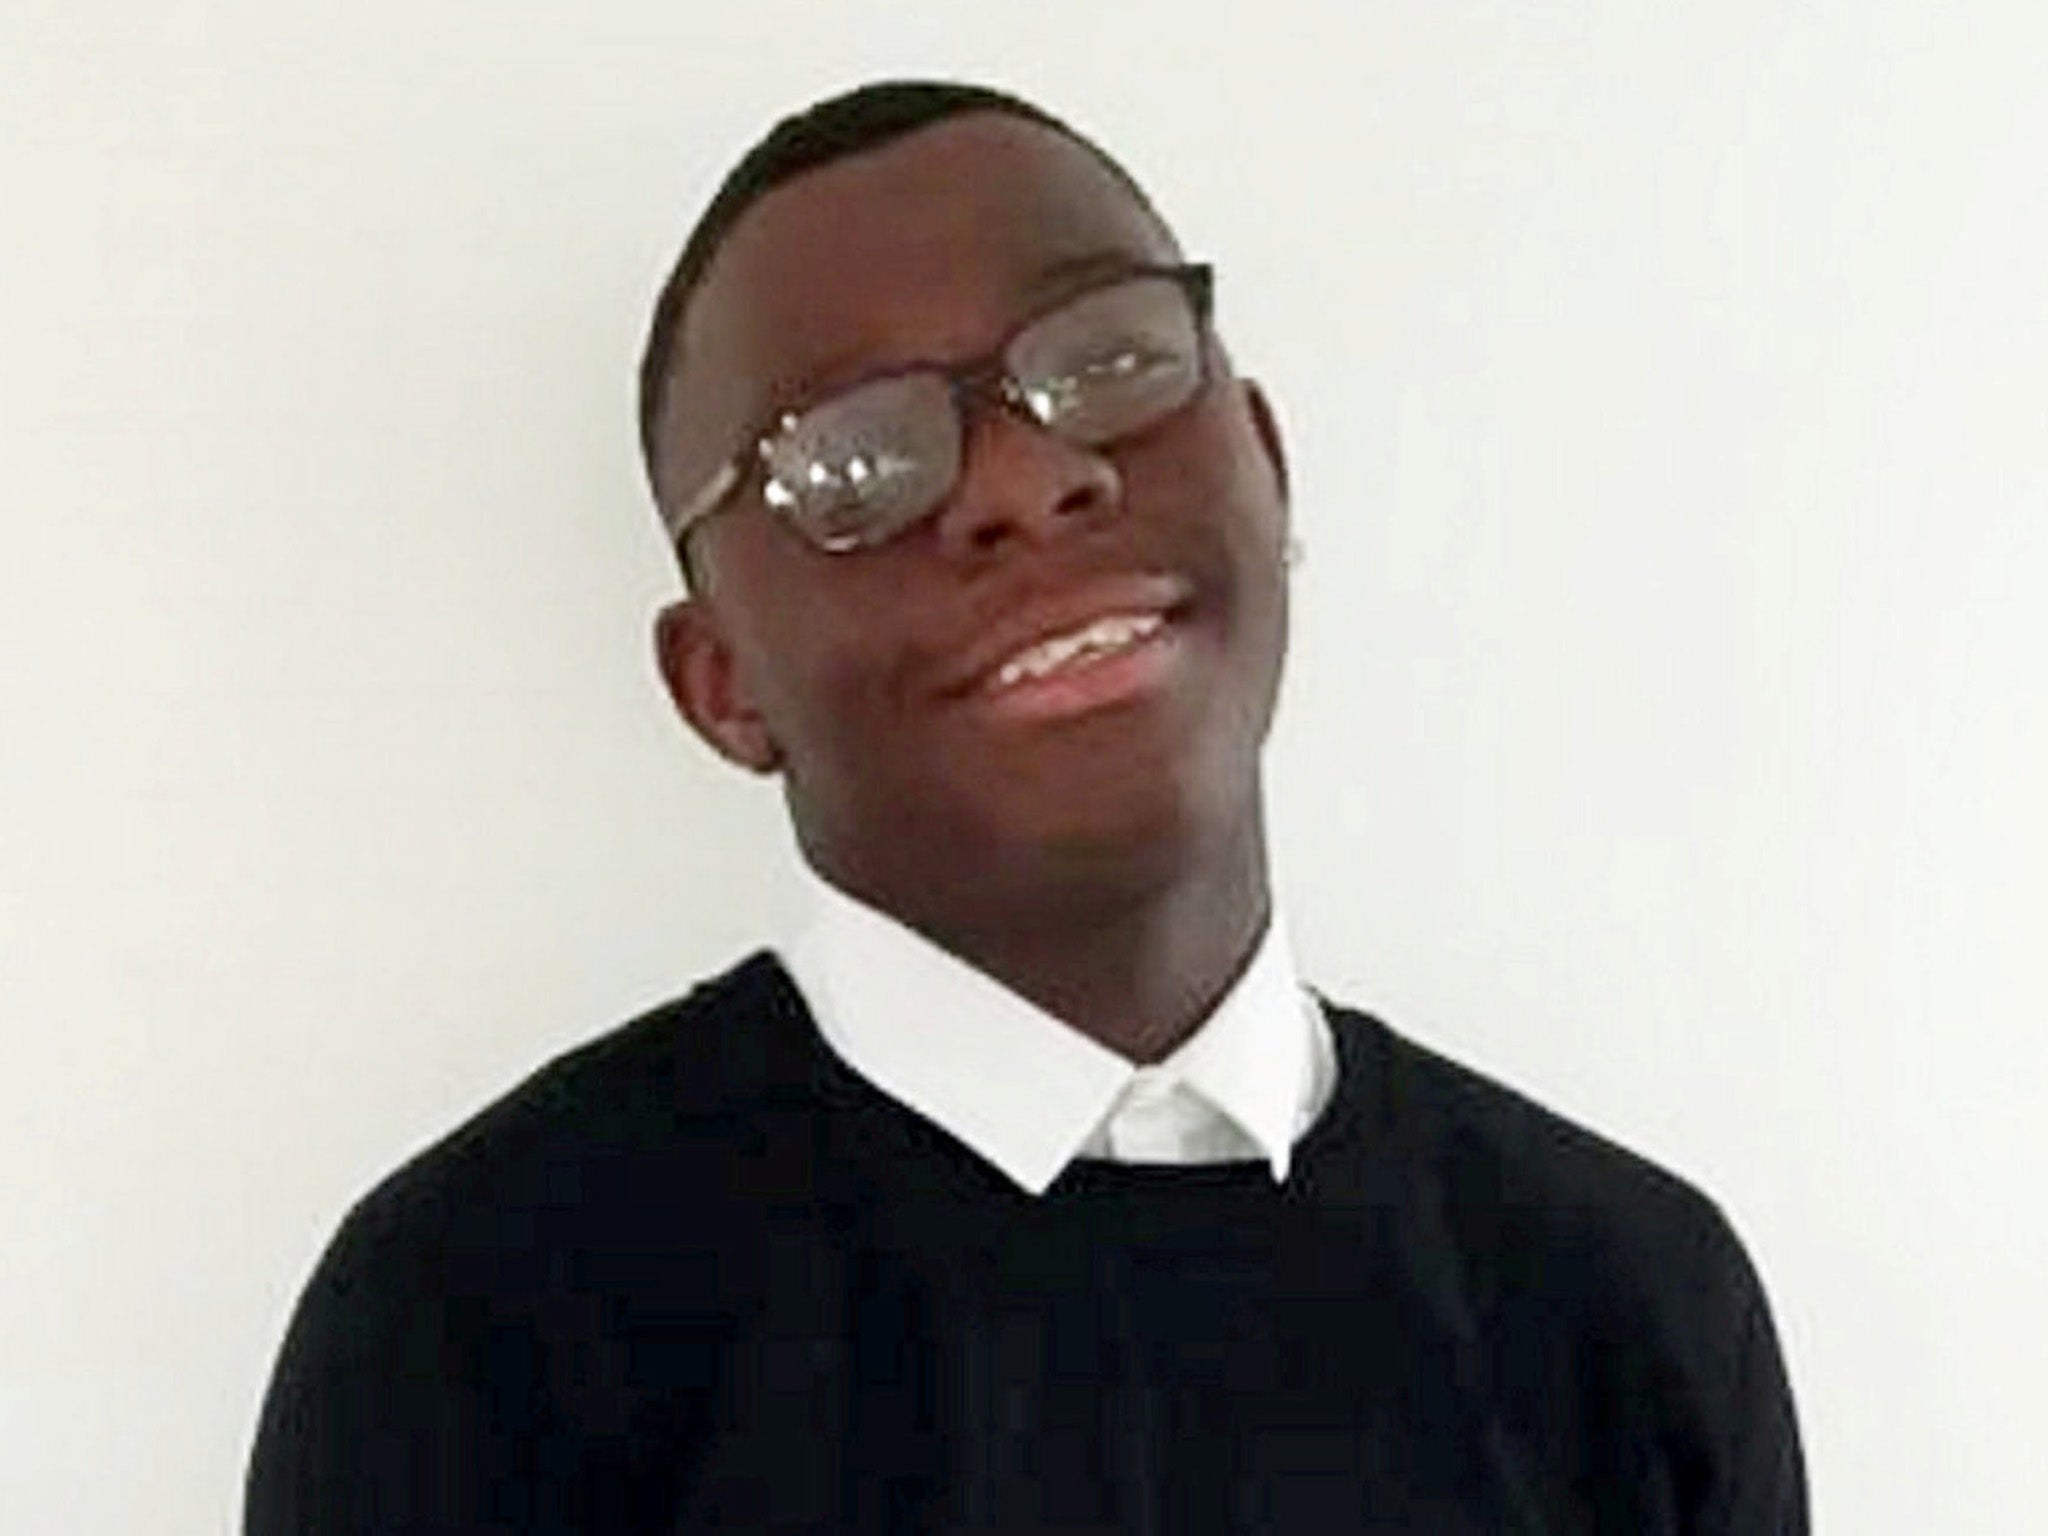 Mother says murdered teen Keon was ‘fun-loving’ and ‘cheeky'